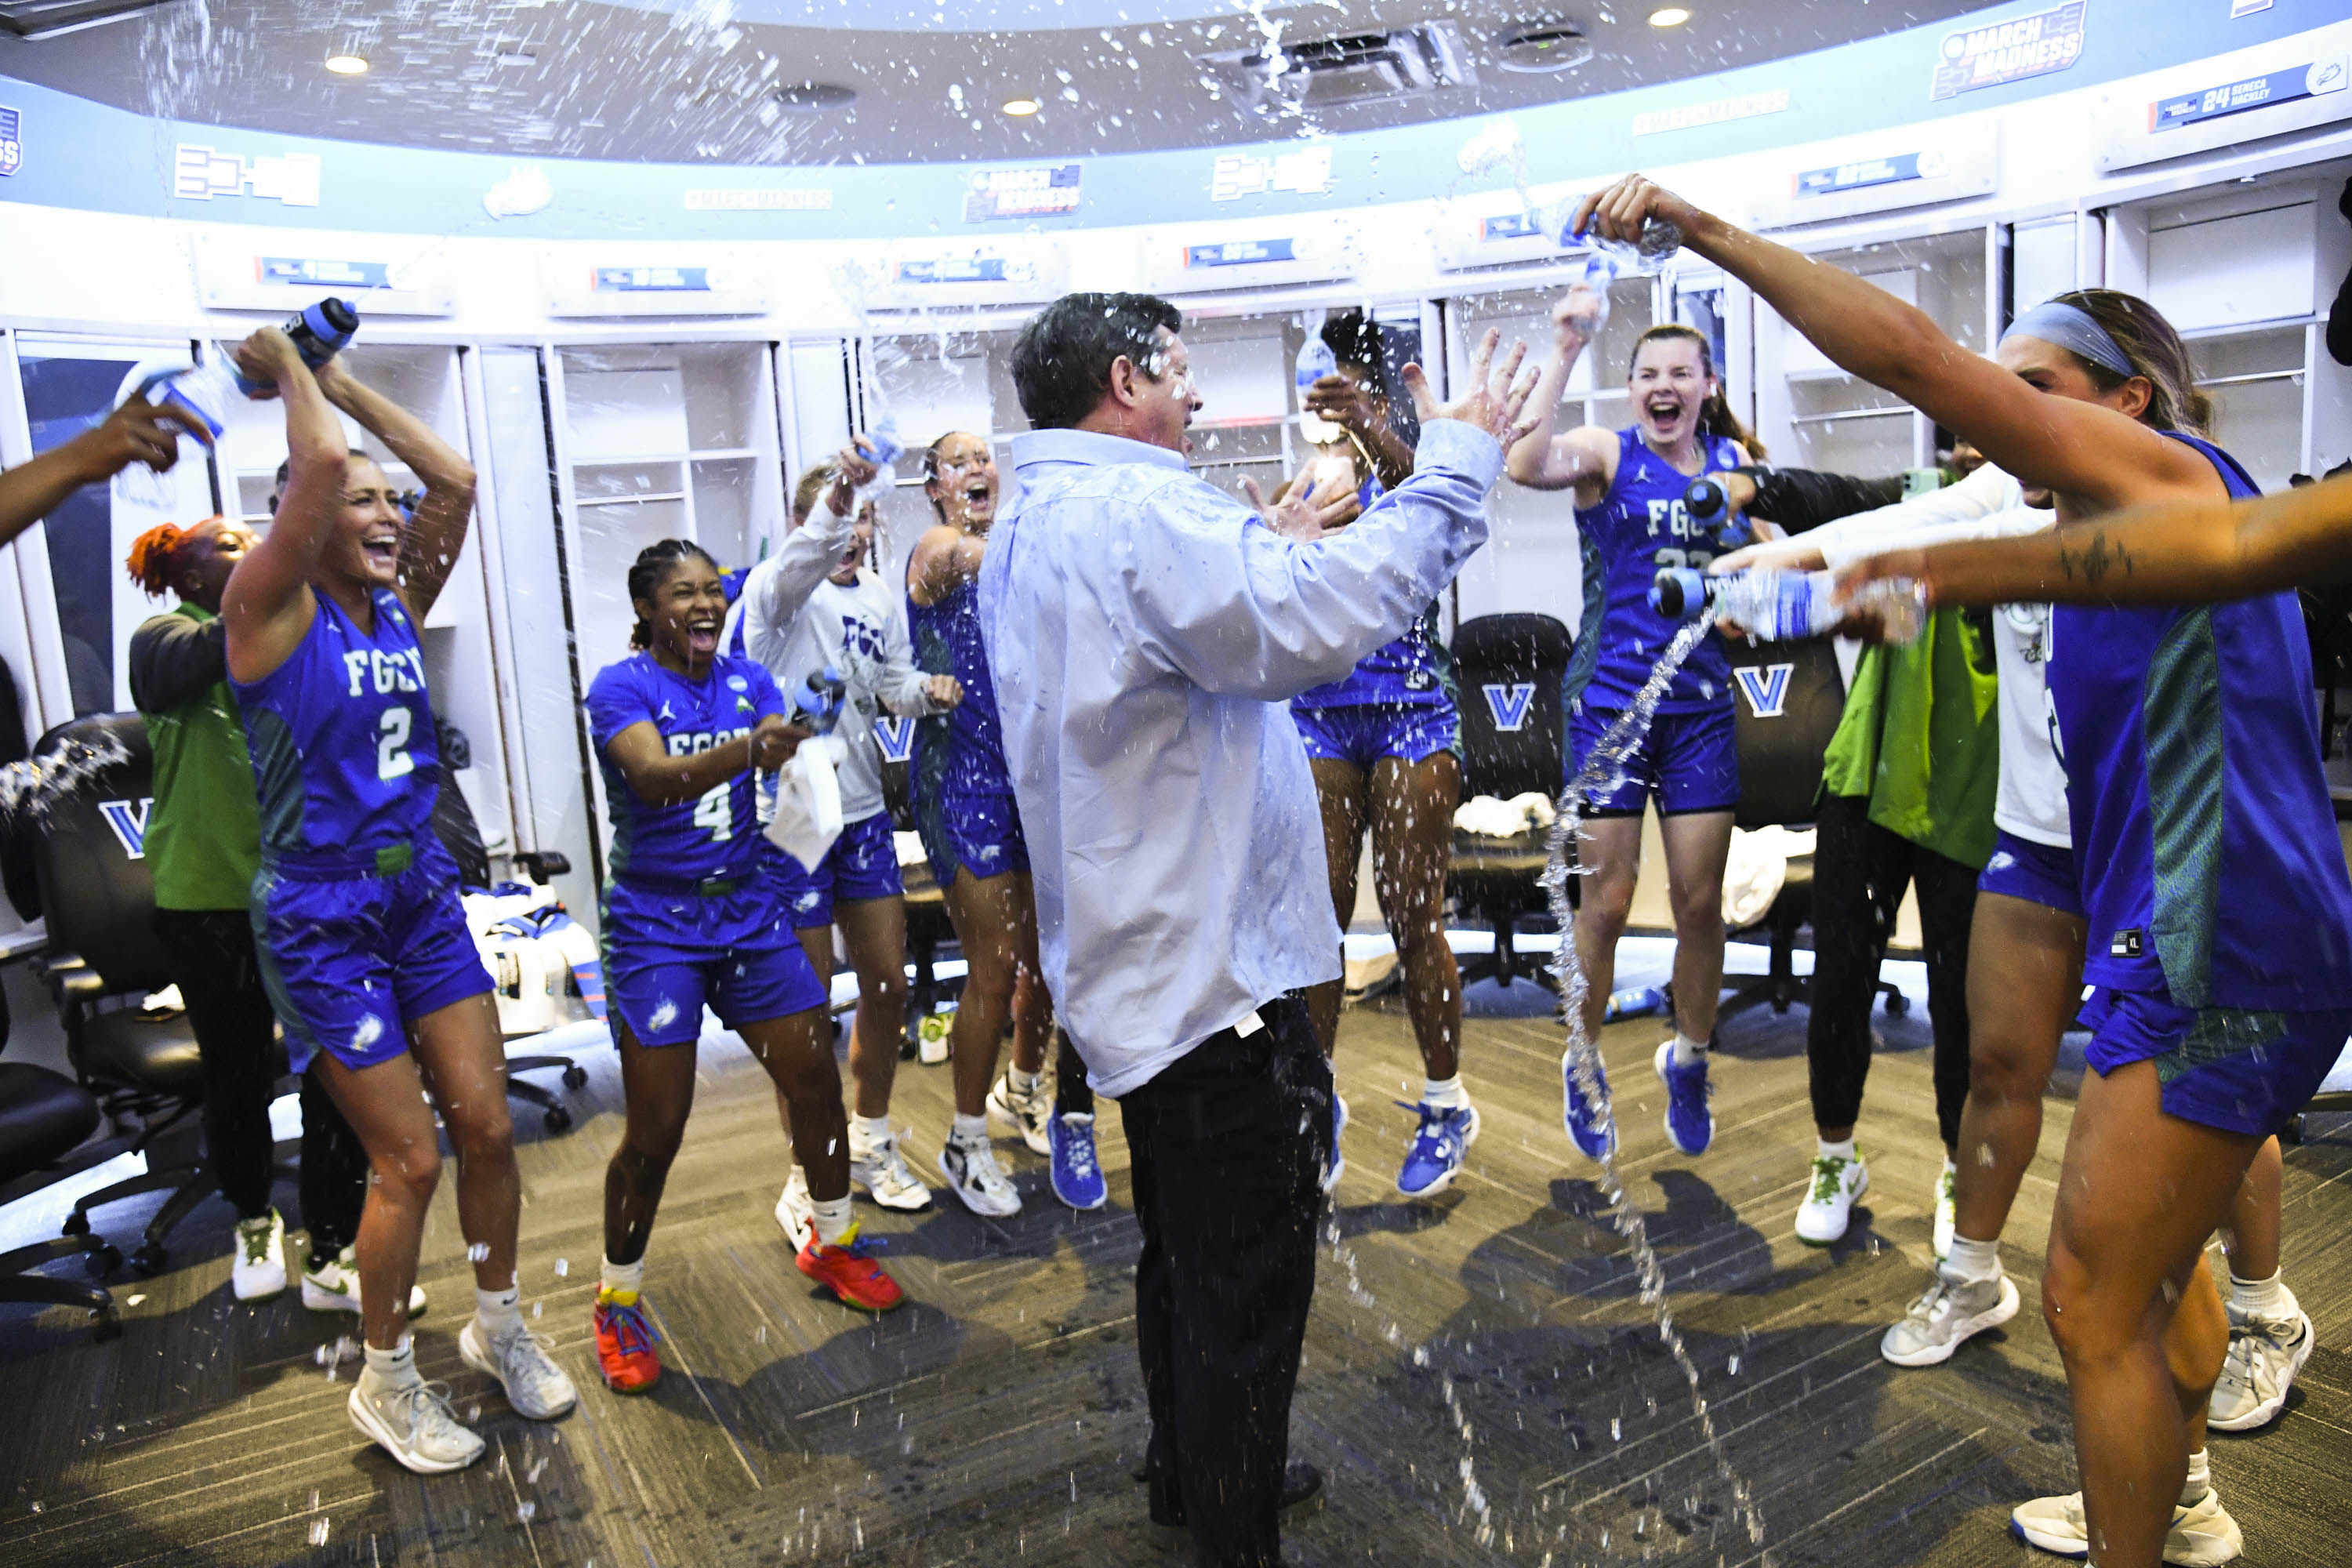 Head coach Karl Smesko gets doused by his team as he enters the locker room following the first round of the 2023 NCAA Women's Basketball Tournament held at Finneran Pavilion on March 18, 2023 in Villanova, Pennsylvania.